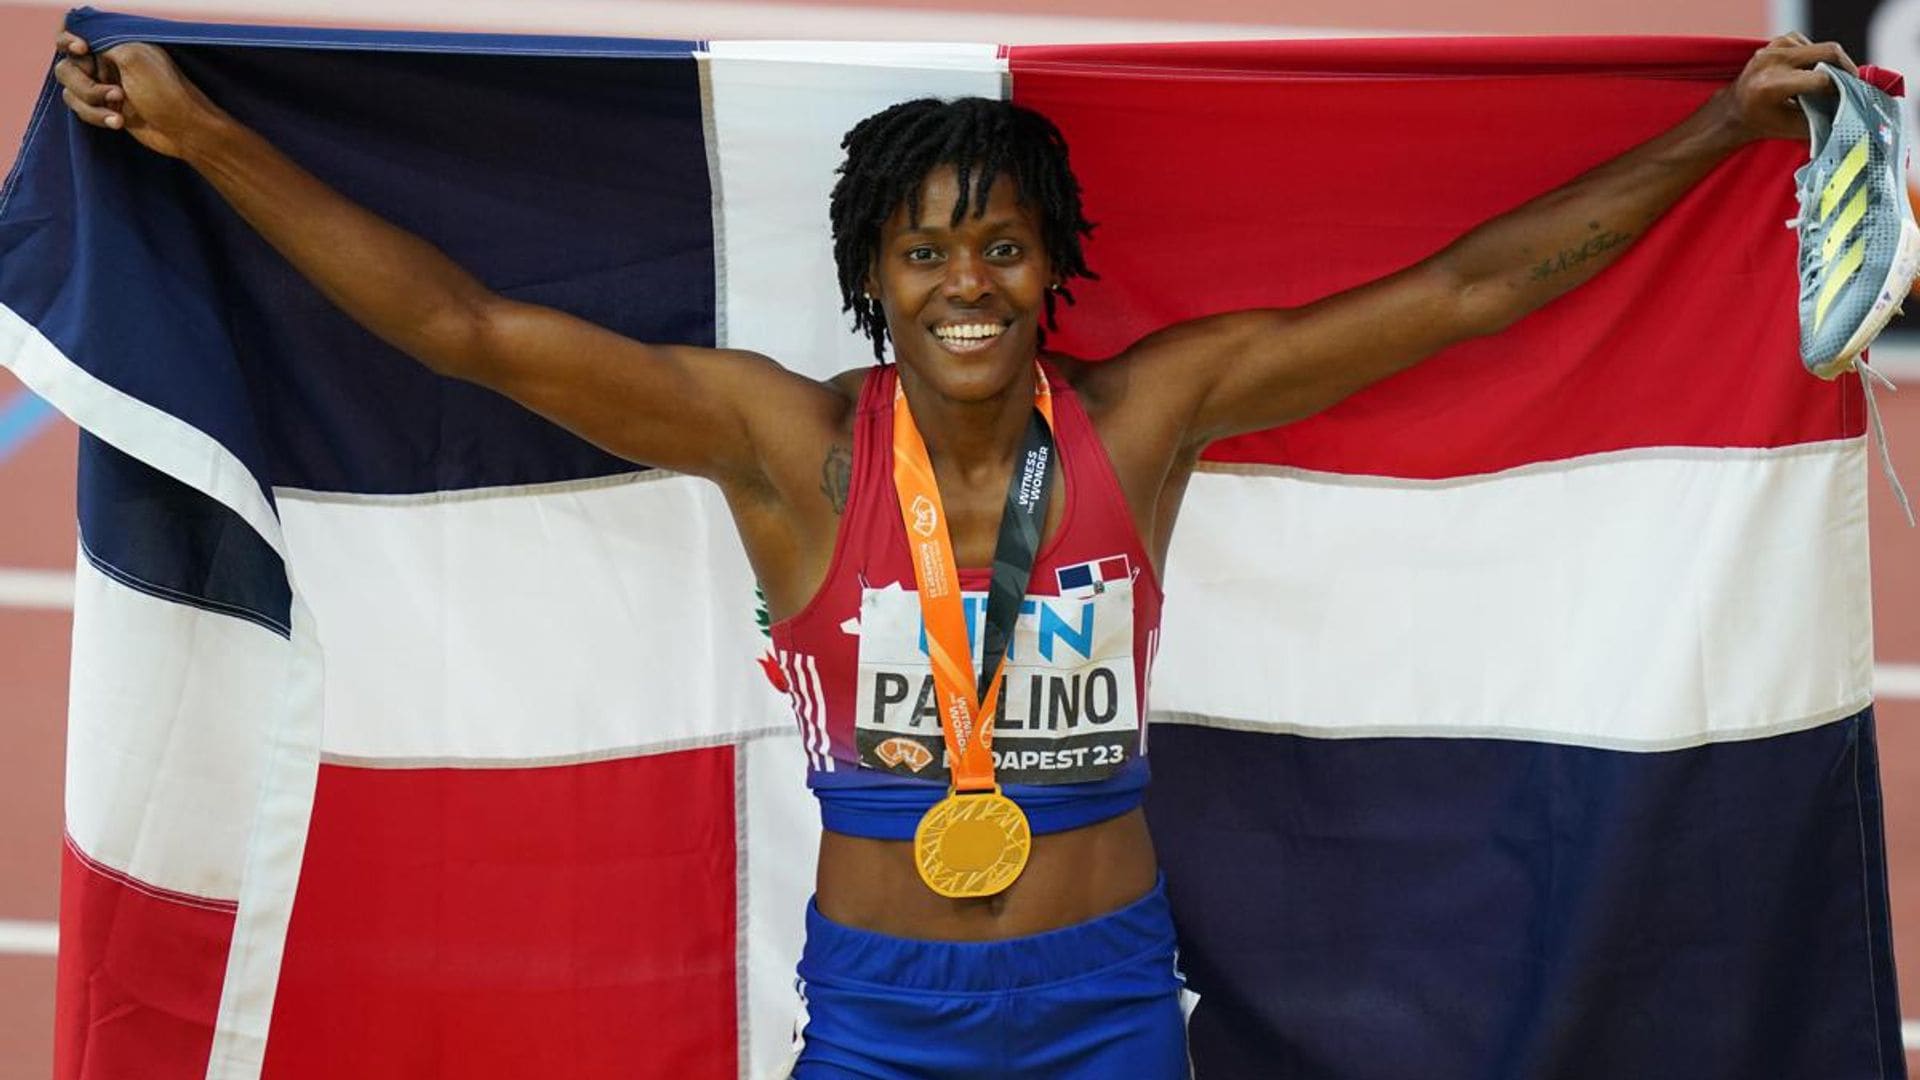 Marileidy Paulino is the Dominican Republic’s first female world champion